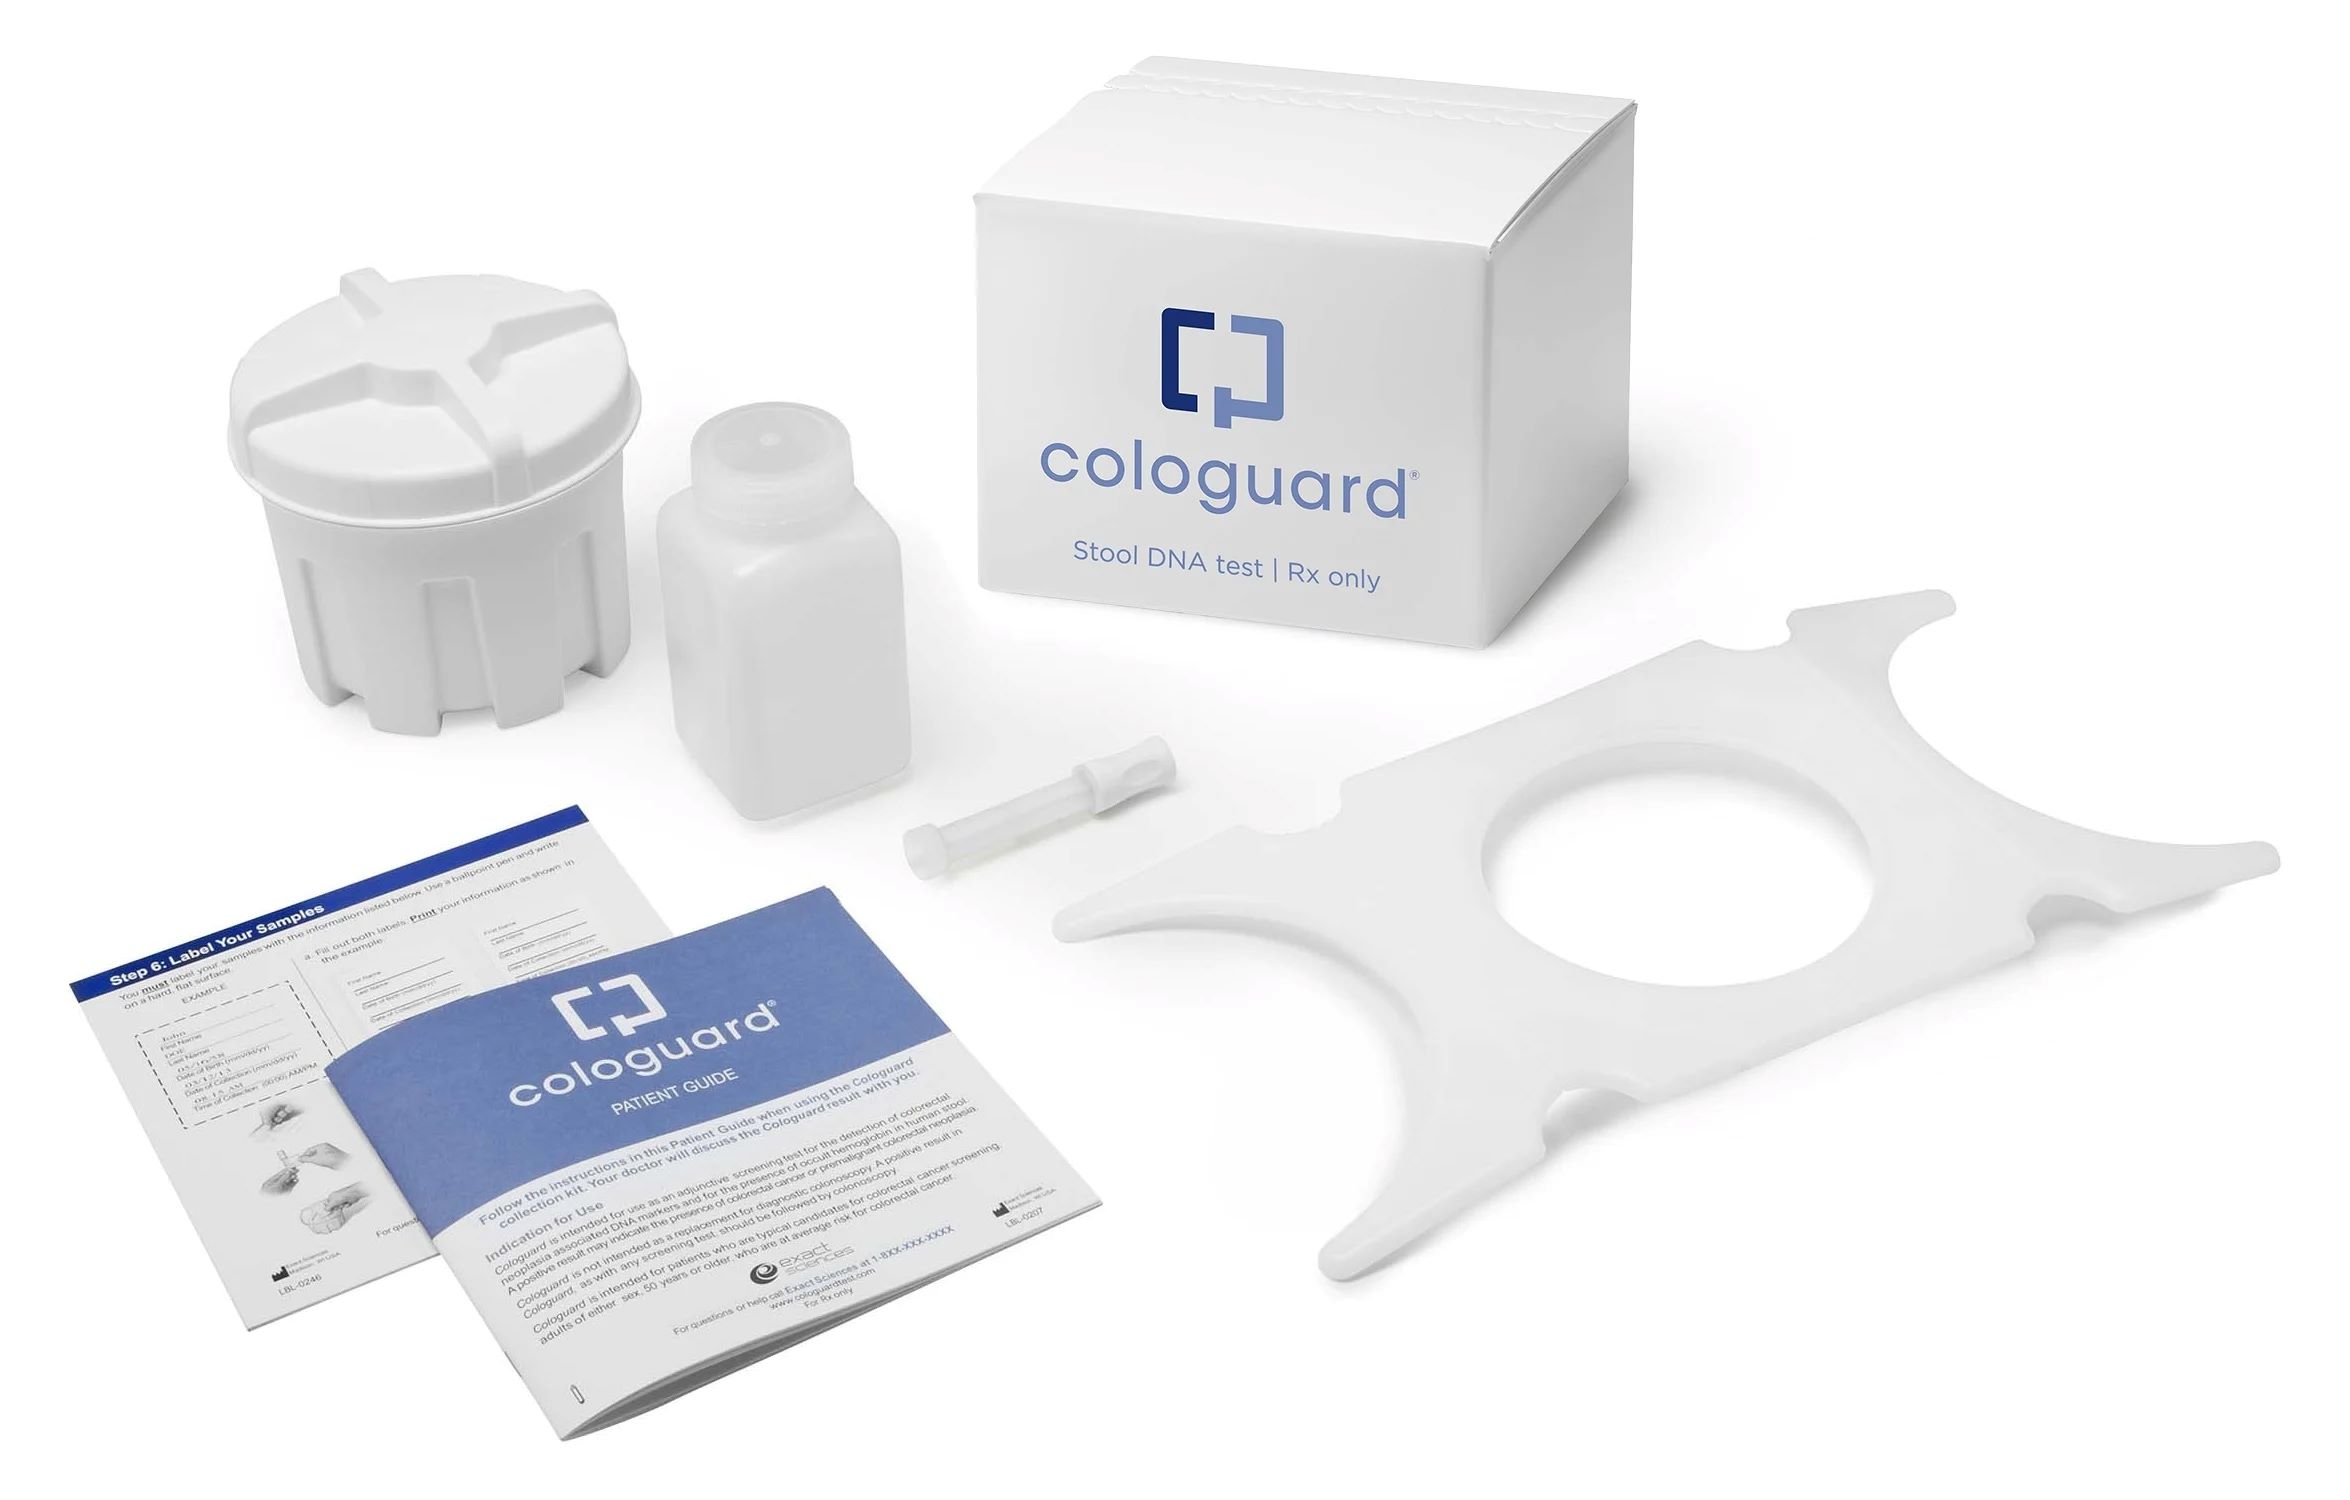 Cologuard: The Superior Choice For Cancer Screening Over Colonoscopy!